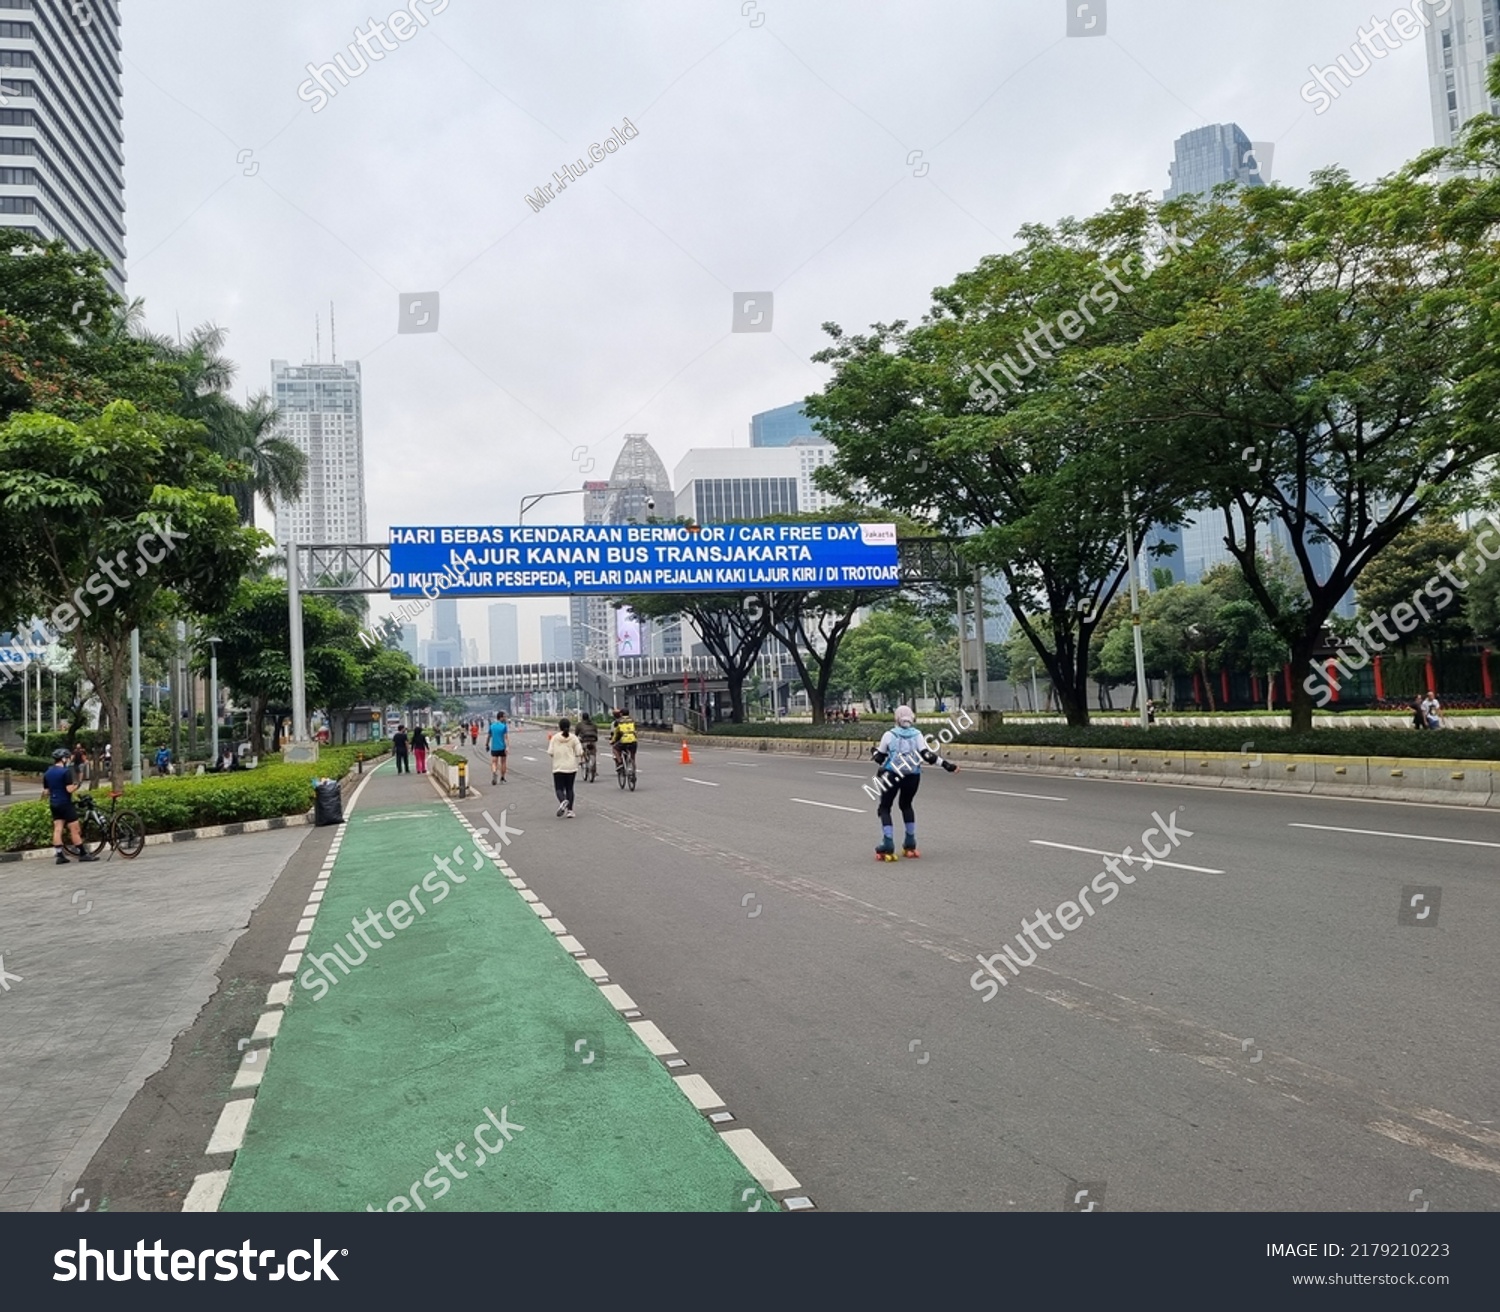 empty street on Sunday car free day, translate: car free day, right lane for transjakarta bus following by cyclist, runner and walker on left lane or sidewalk #2179210223